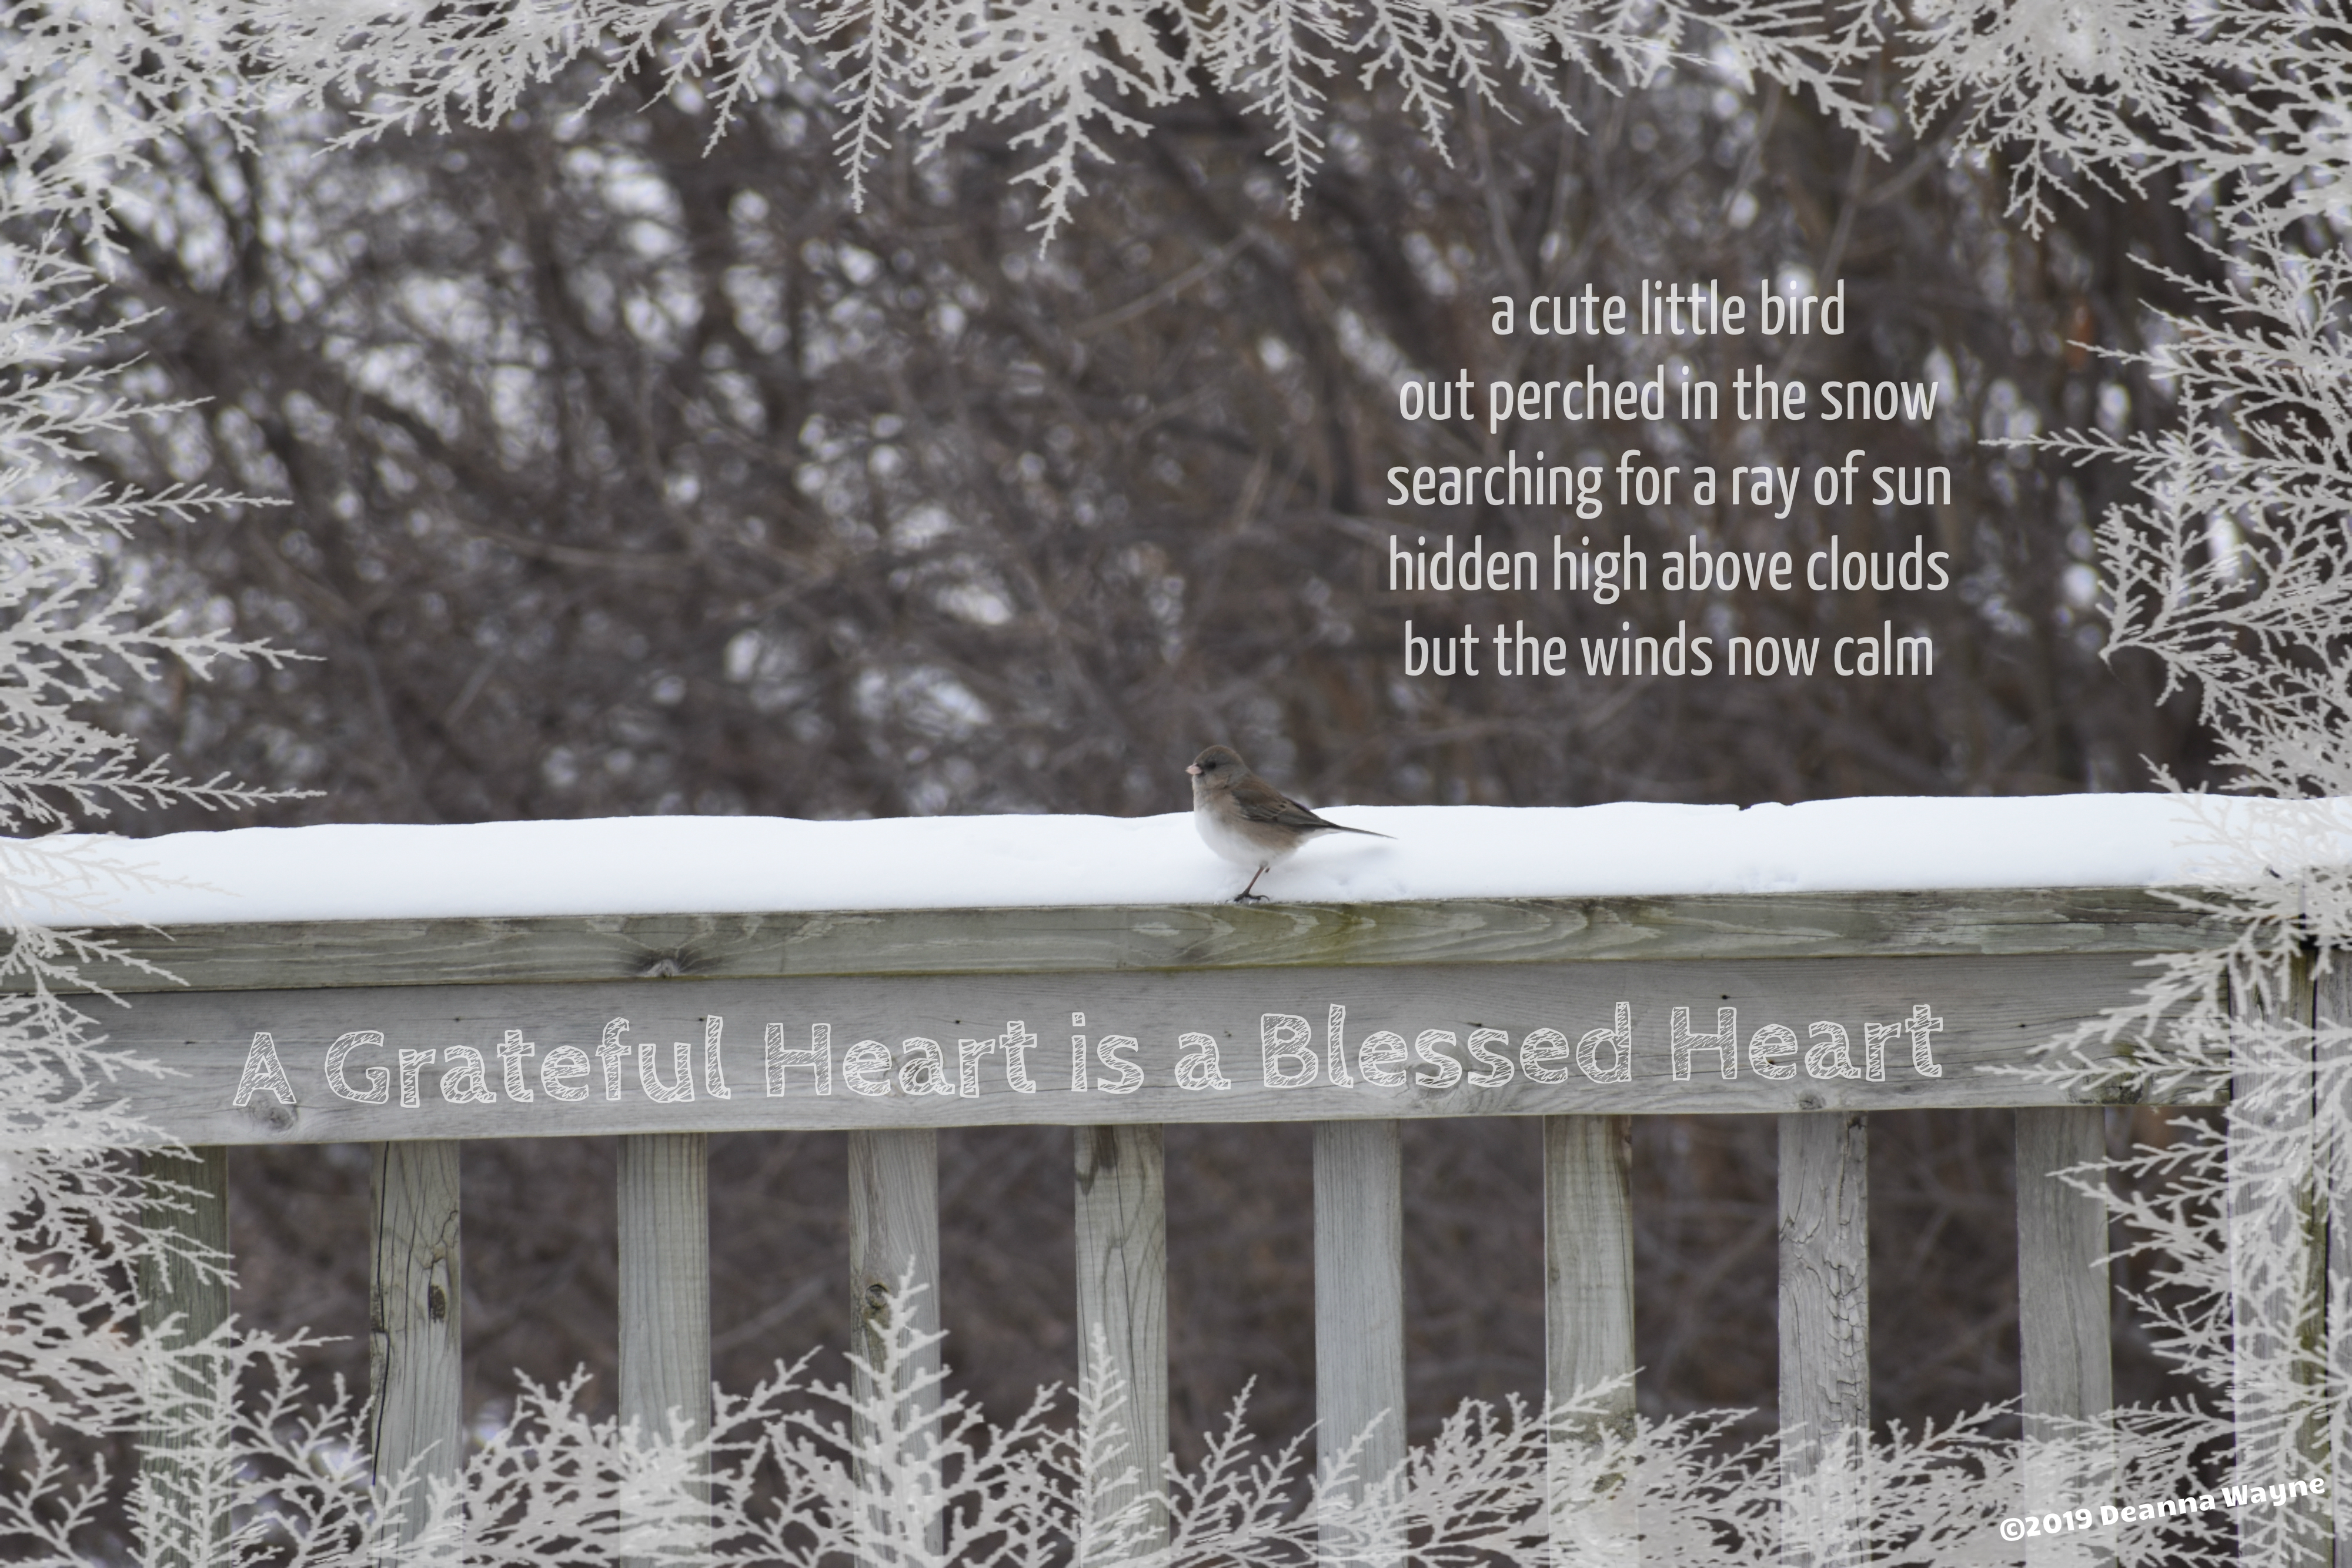 A Grateful Heart is a Blessed Heart